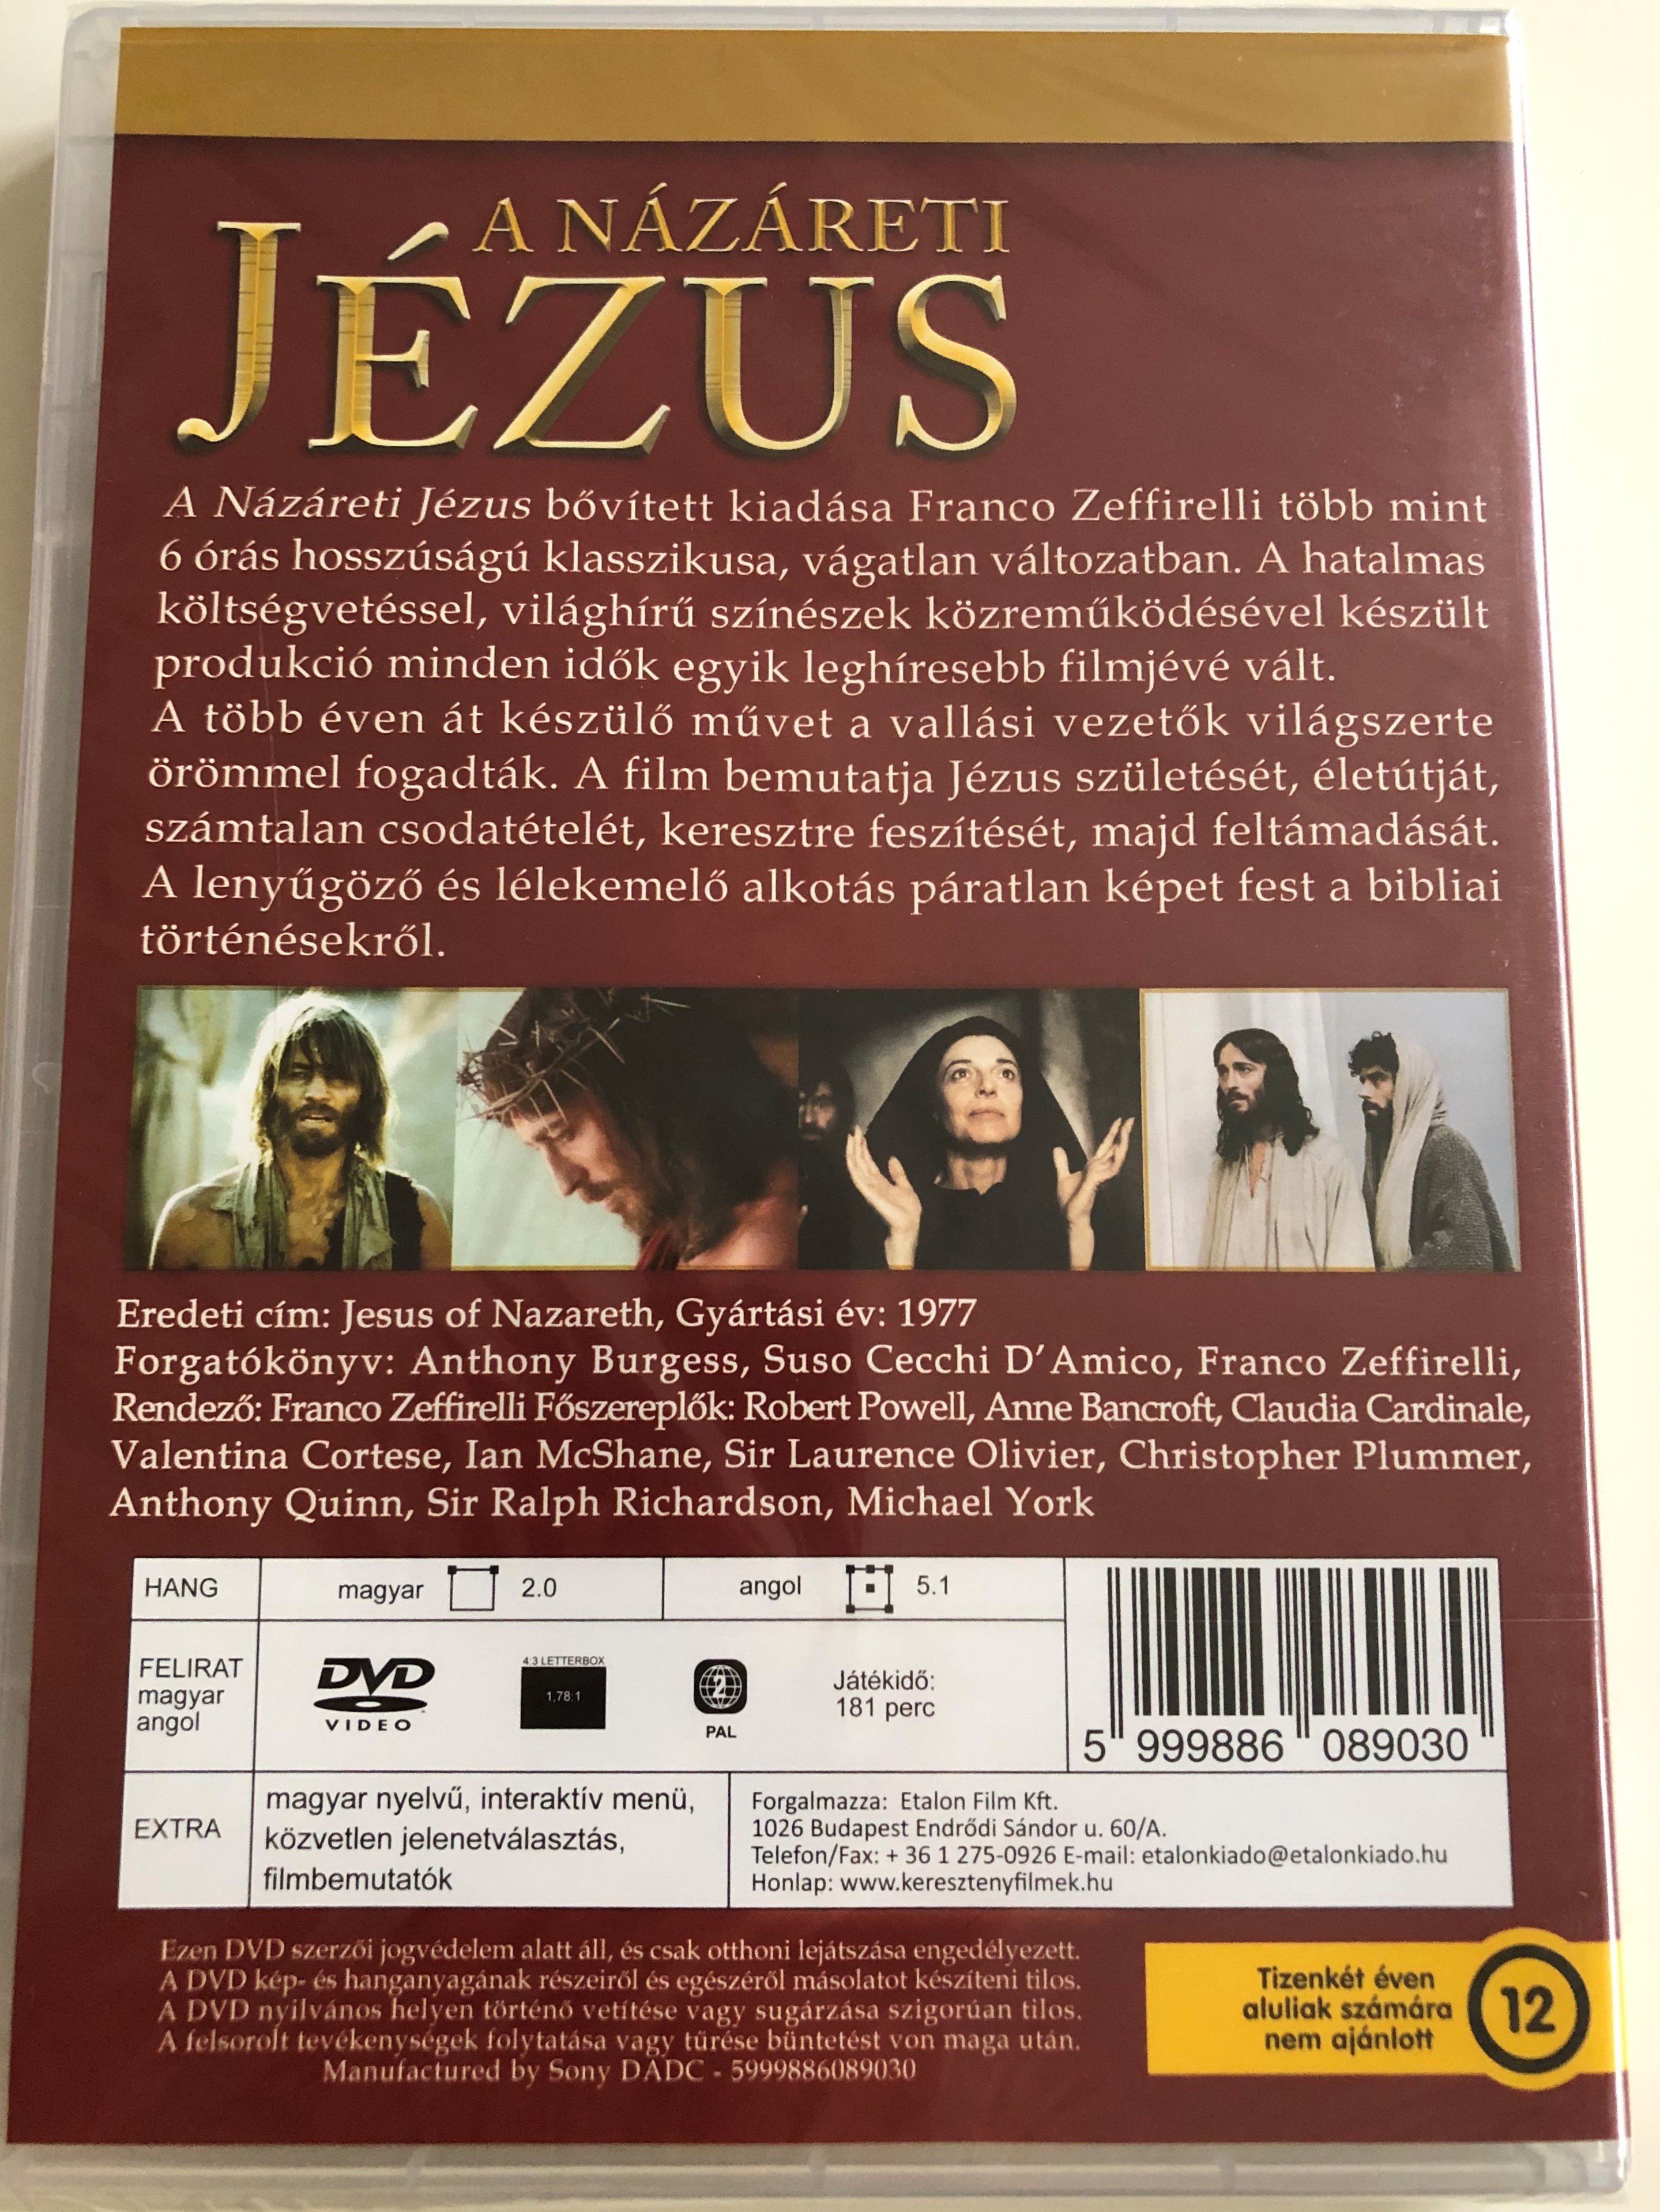 jesus-of-nazareth-ii2.-dvd-1977-a-n-z-reti-j-zus-directed-by-franco-zeffirelli-starring-robert-powell-anne-bancroft-claudia-cardinale-valentina-cortese-ian-mcshane-sir-laurence-olivier-extended-remastered-edition-.jpg